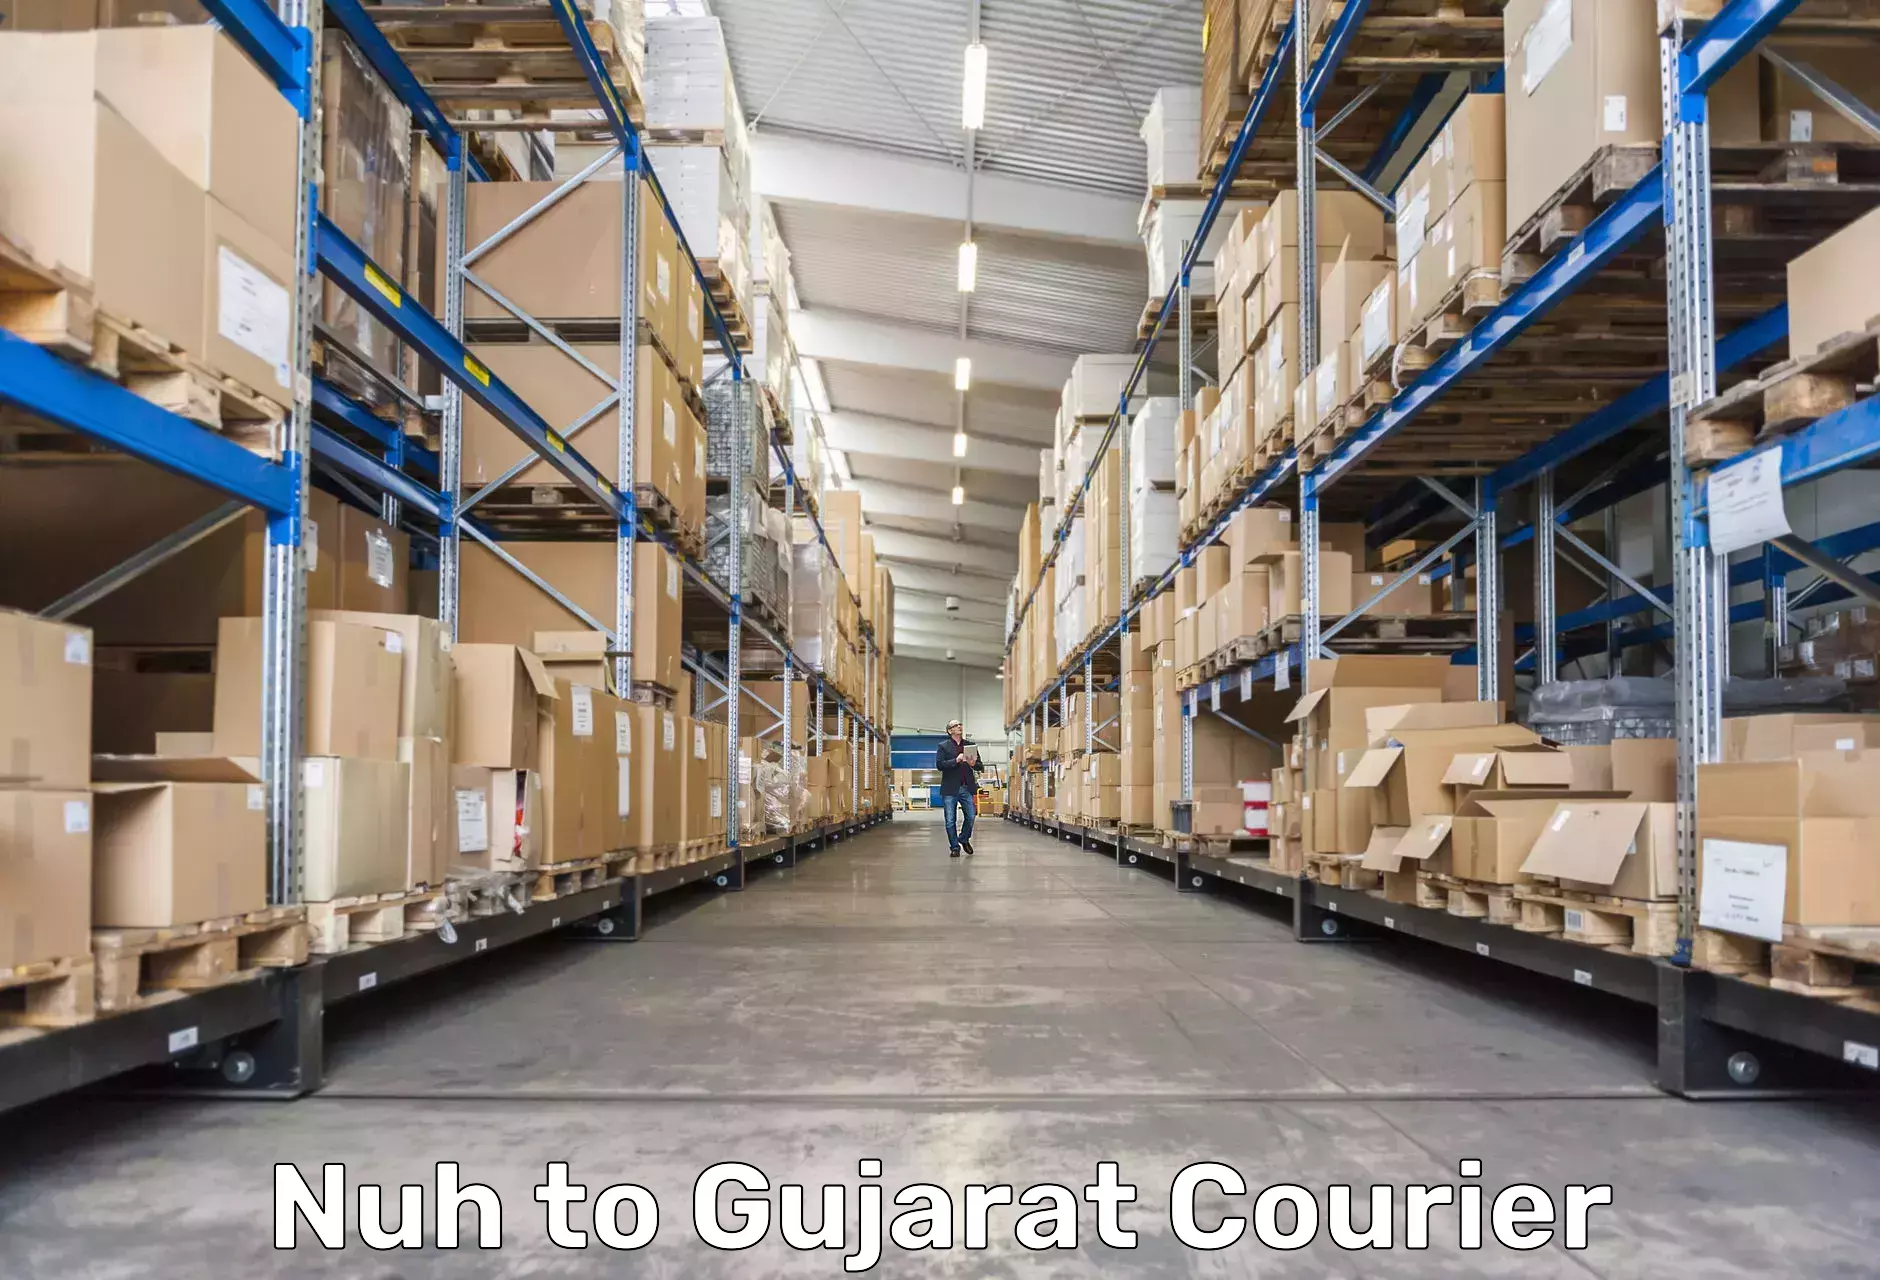 Customizable delivery plans Nuh to Gujarat